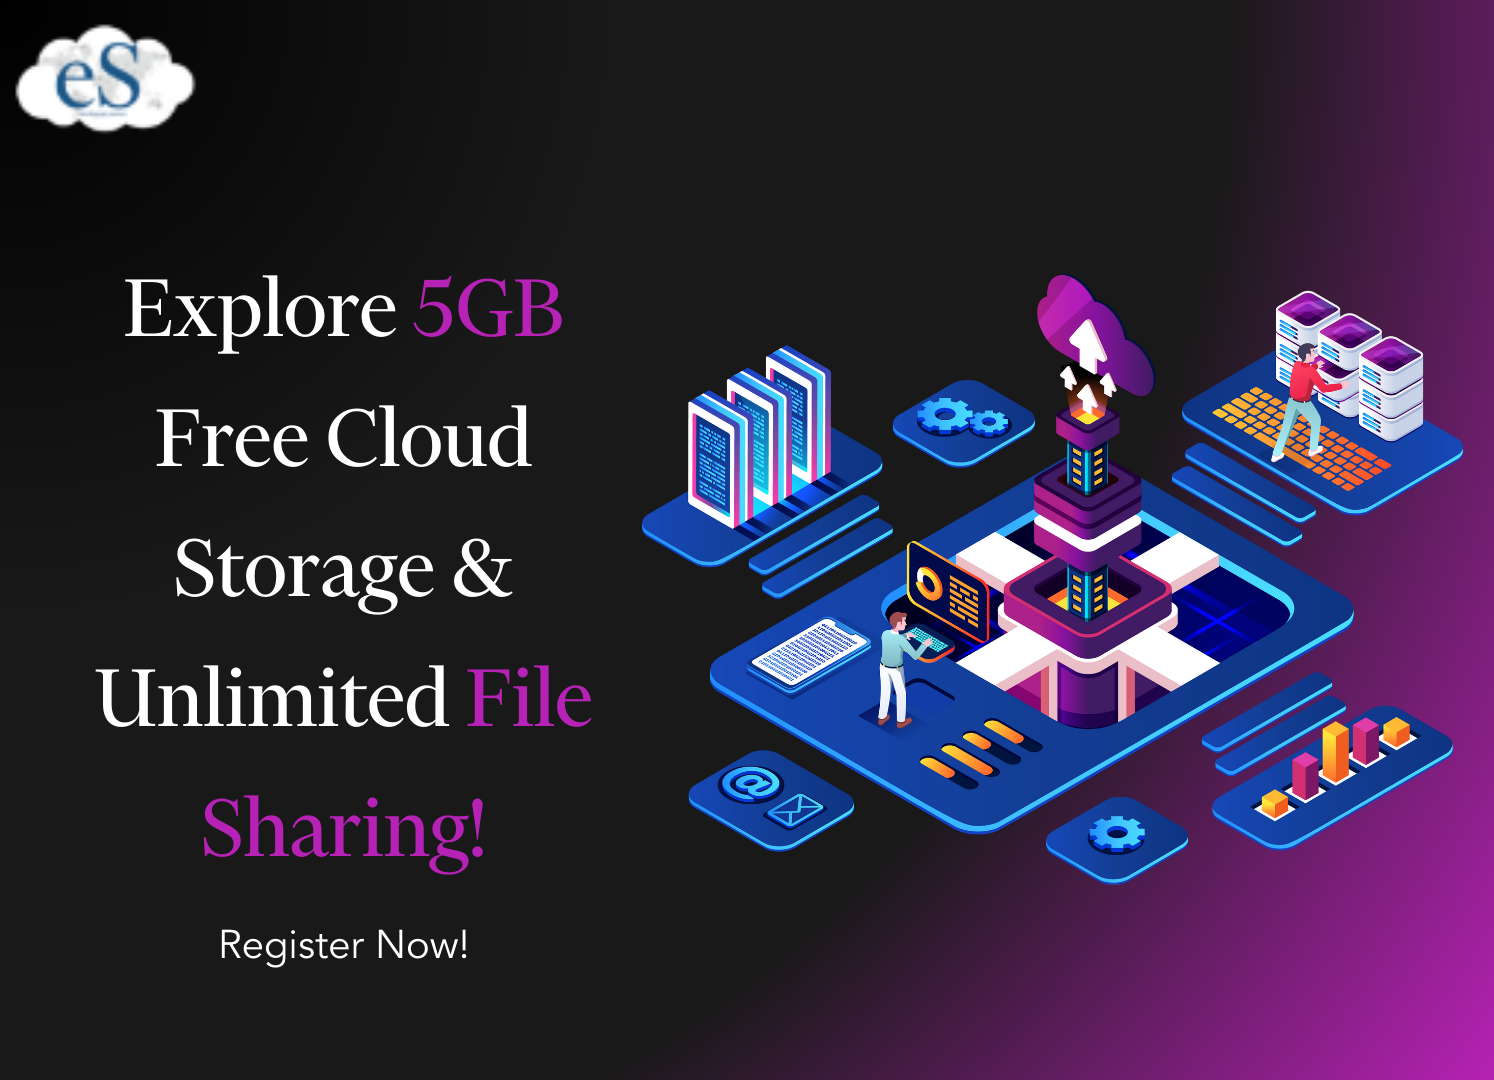 Explore 5GB Free Cloud Storage and Unlimited File Sharing